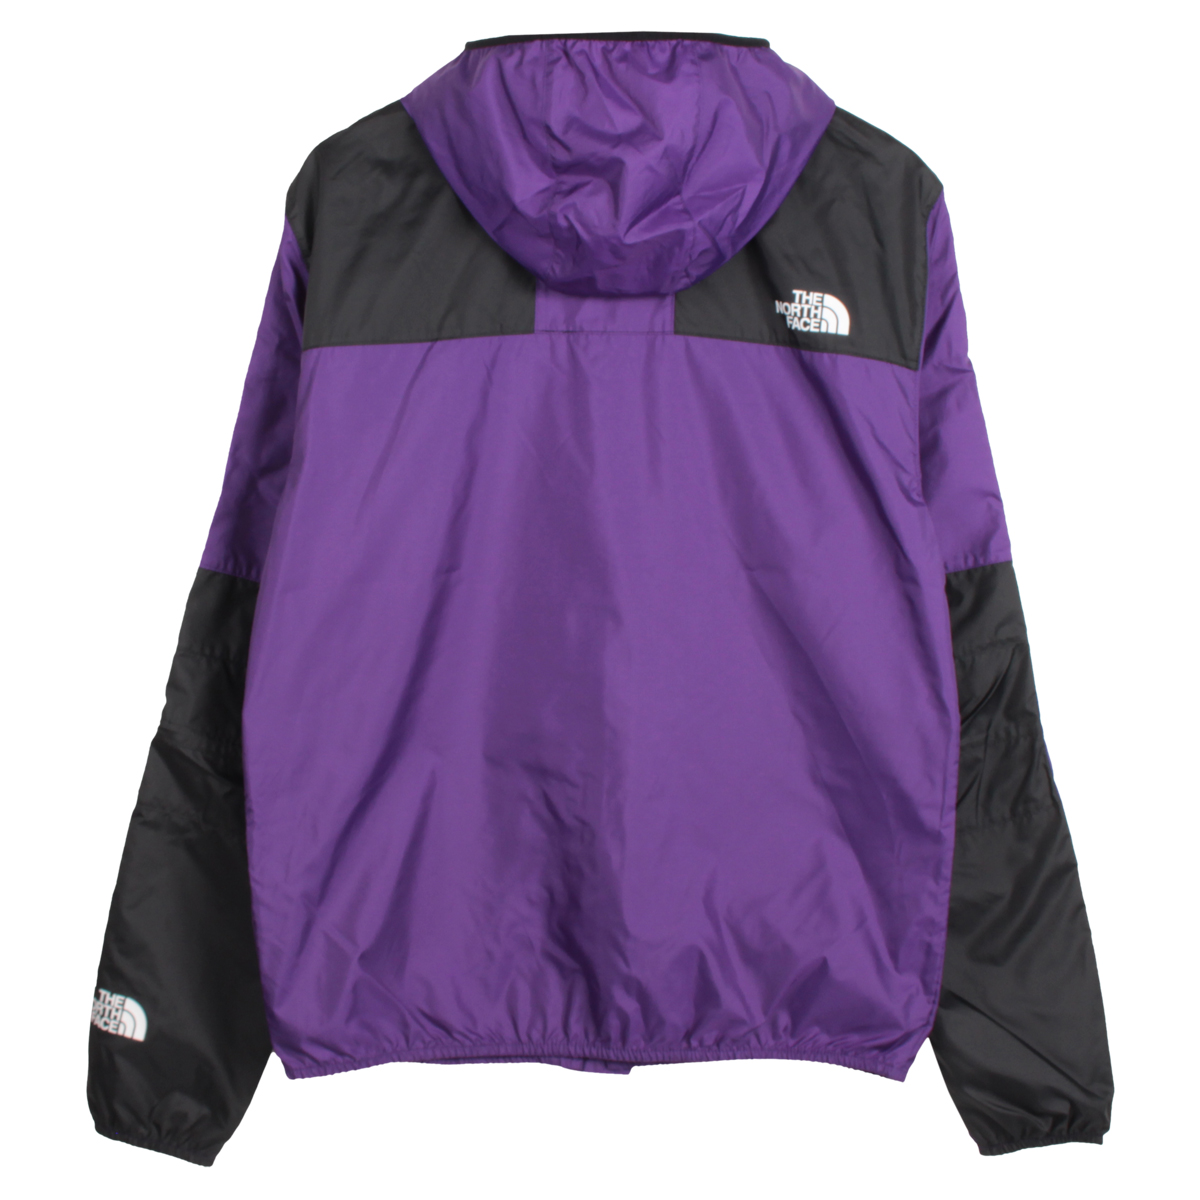 the north face online shopping